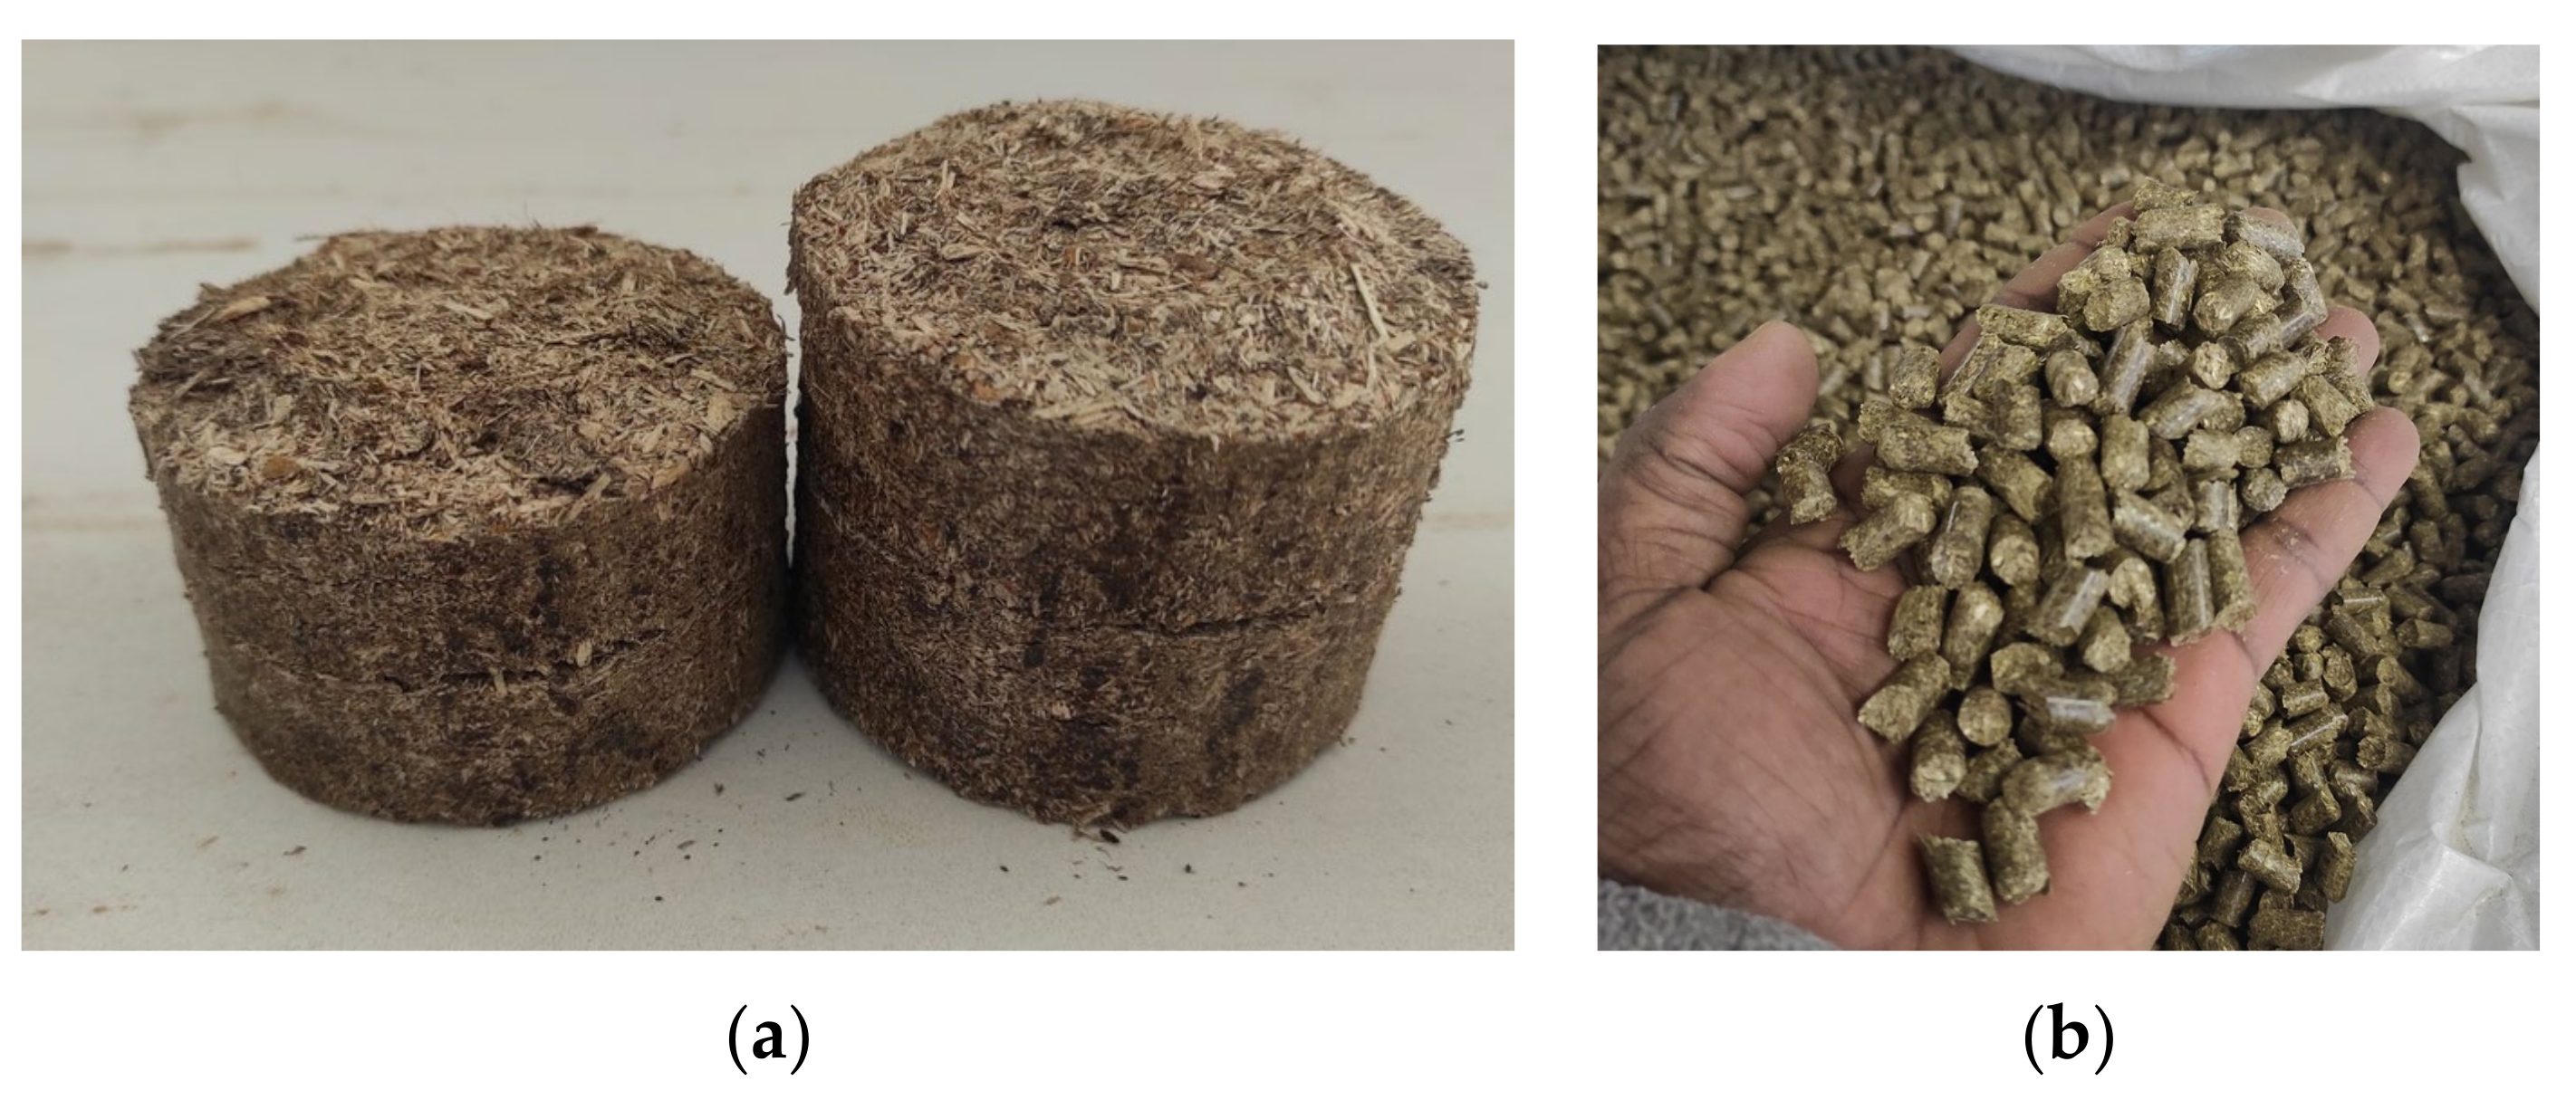 Energies | Free Full-Text | A Review of Biomass Briquette Binders and  Quality Parameters